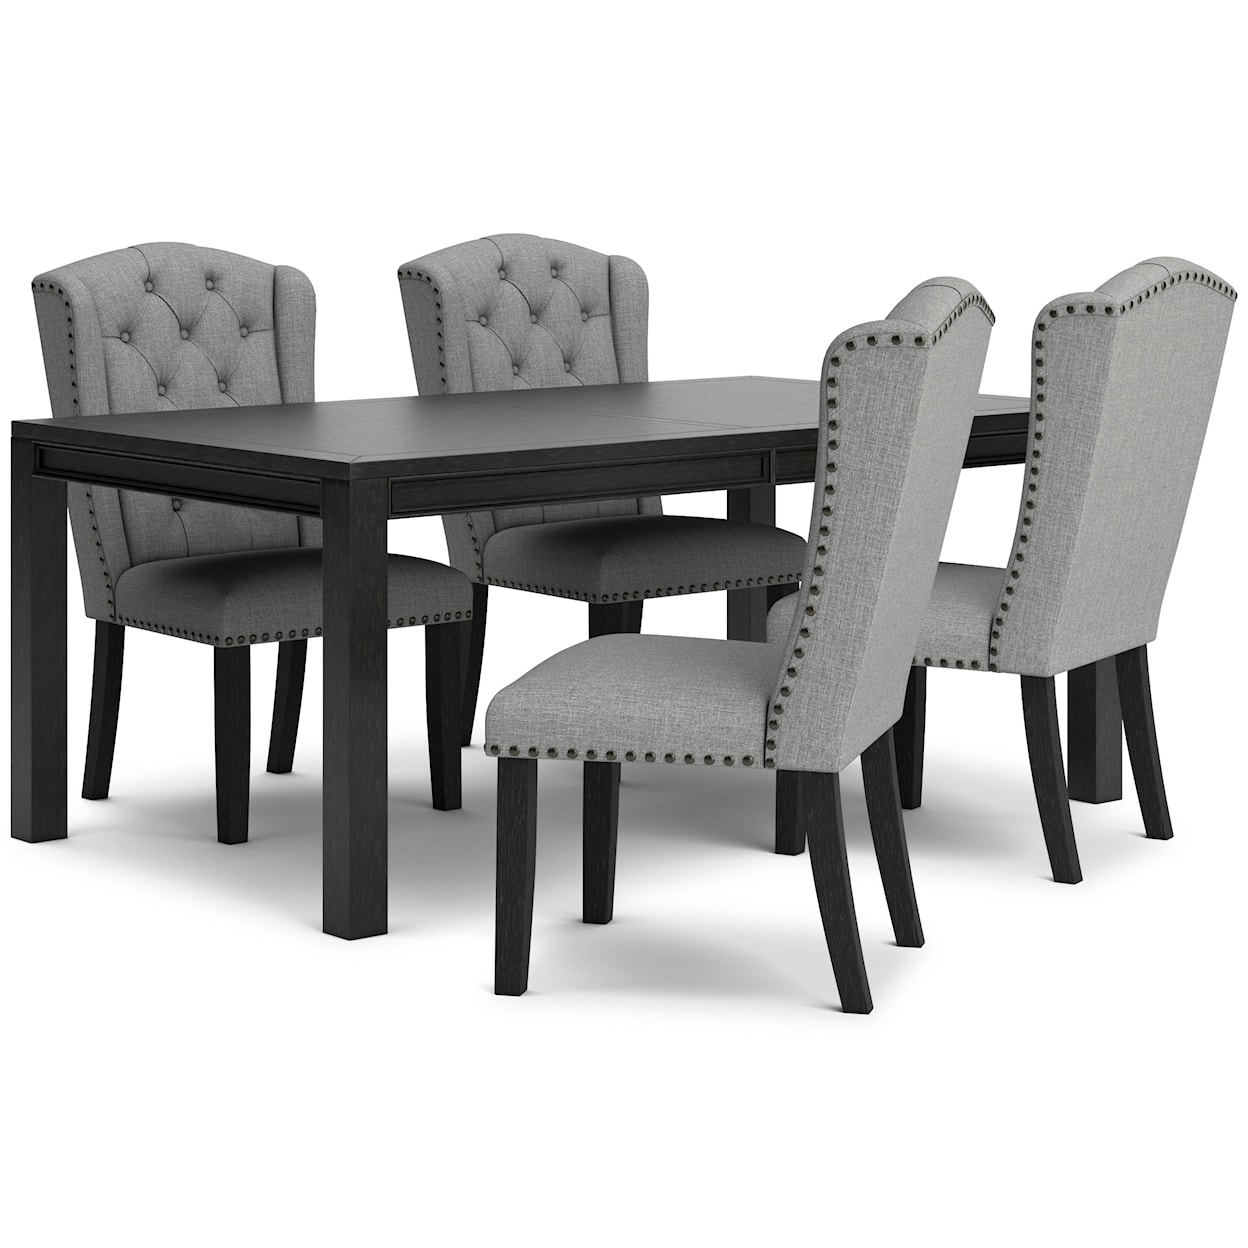 Signature Design by Ashley Furniture Jeanette 5-Piece Dining Set